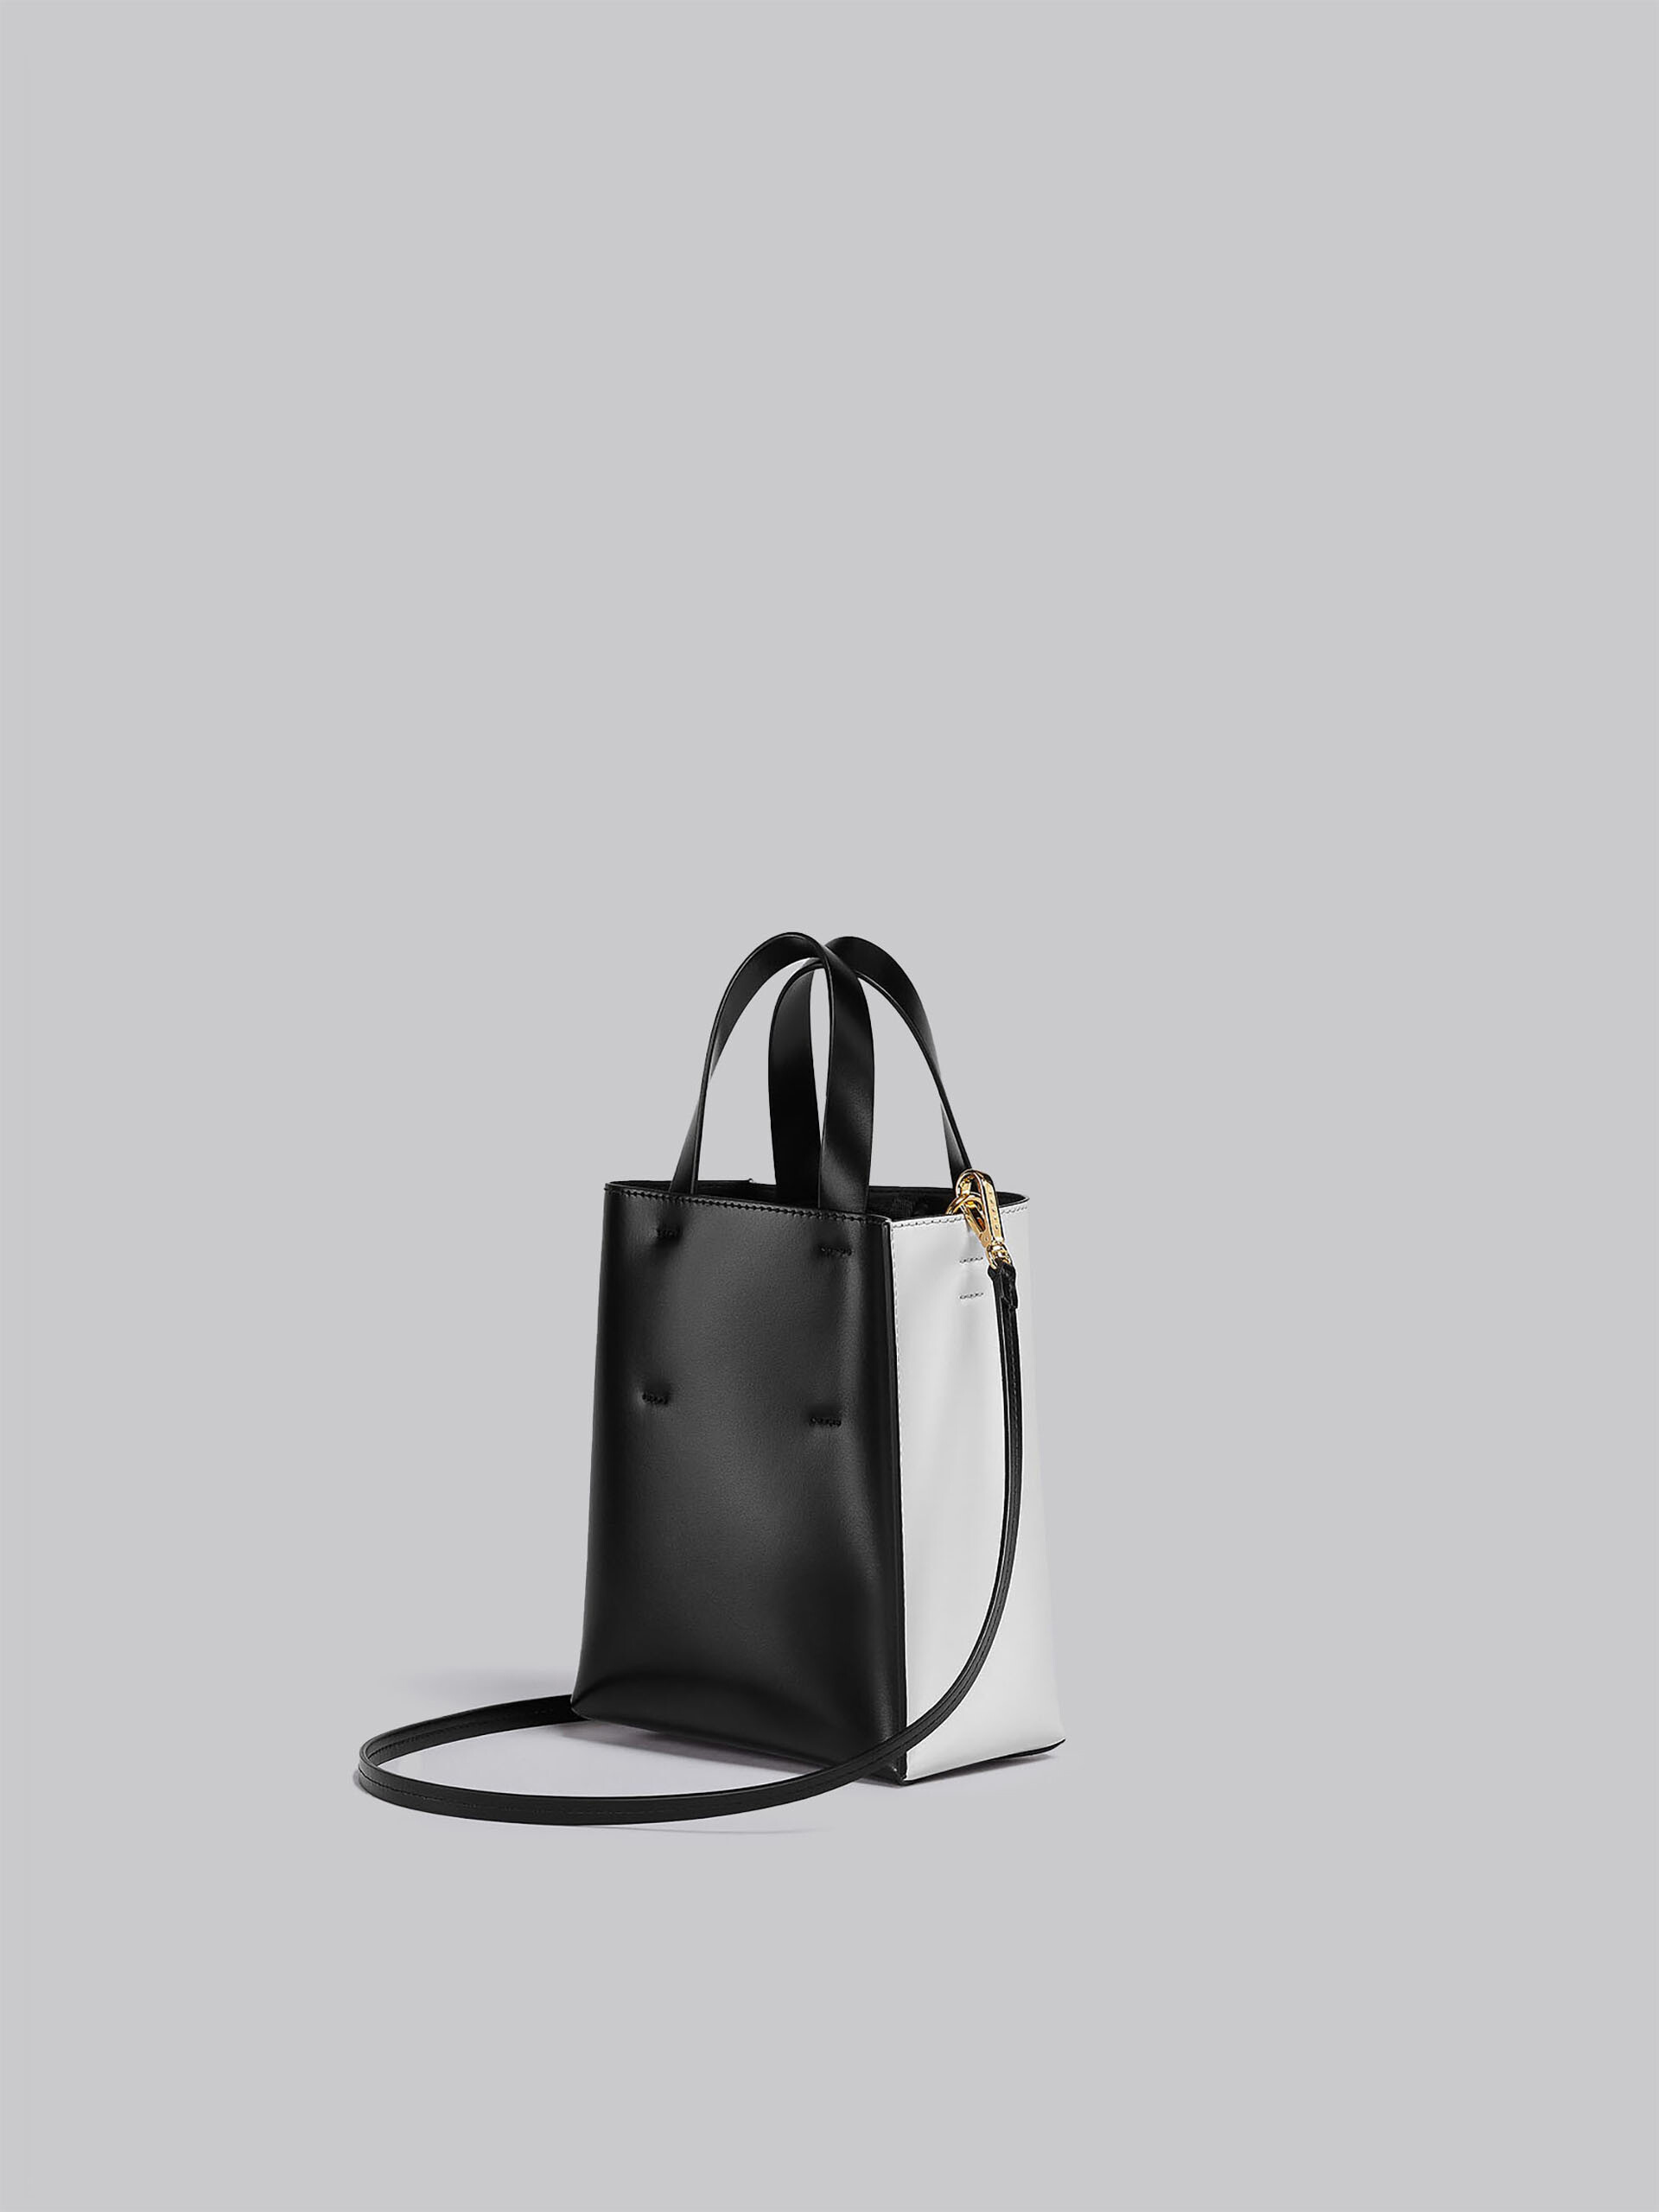 MUSEO mini bag in white and black leather - Shopping Bags - Image 2